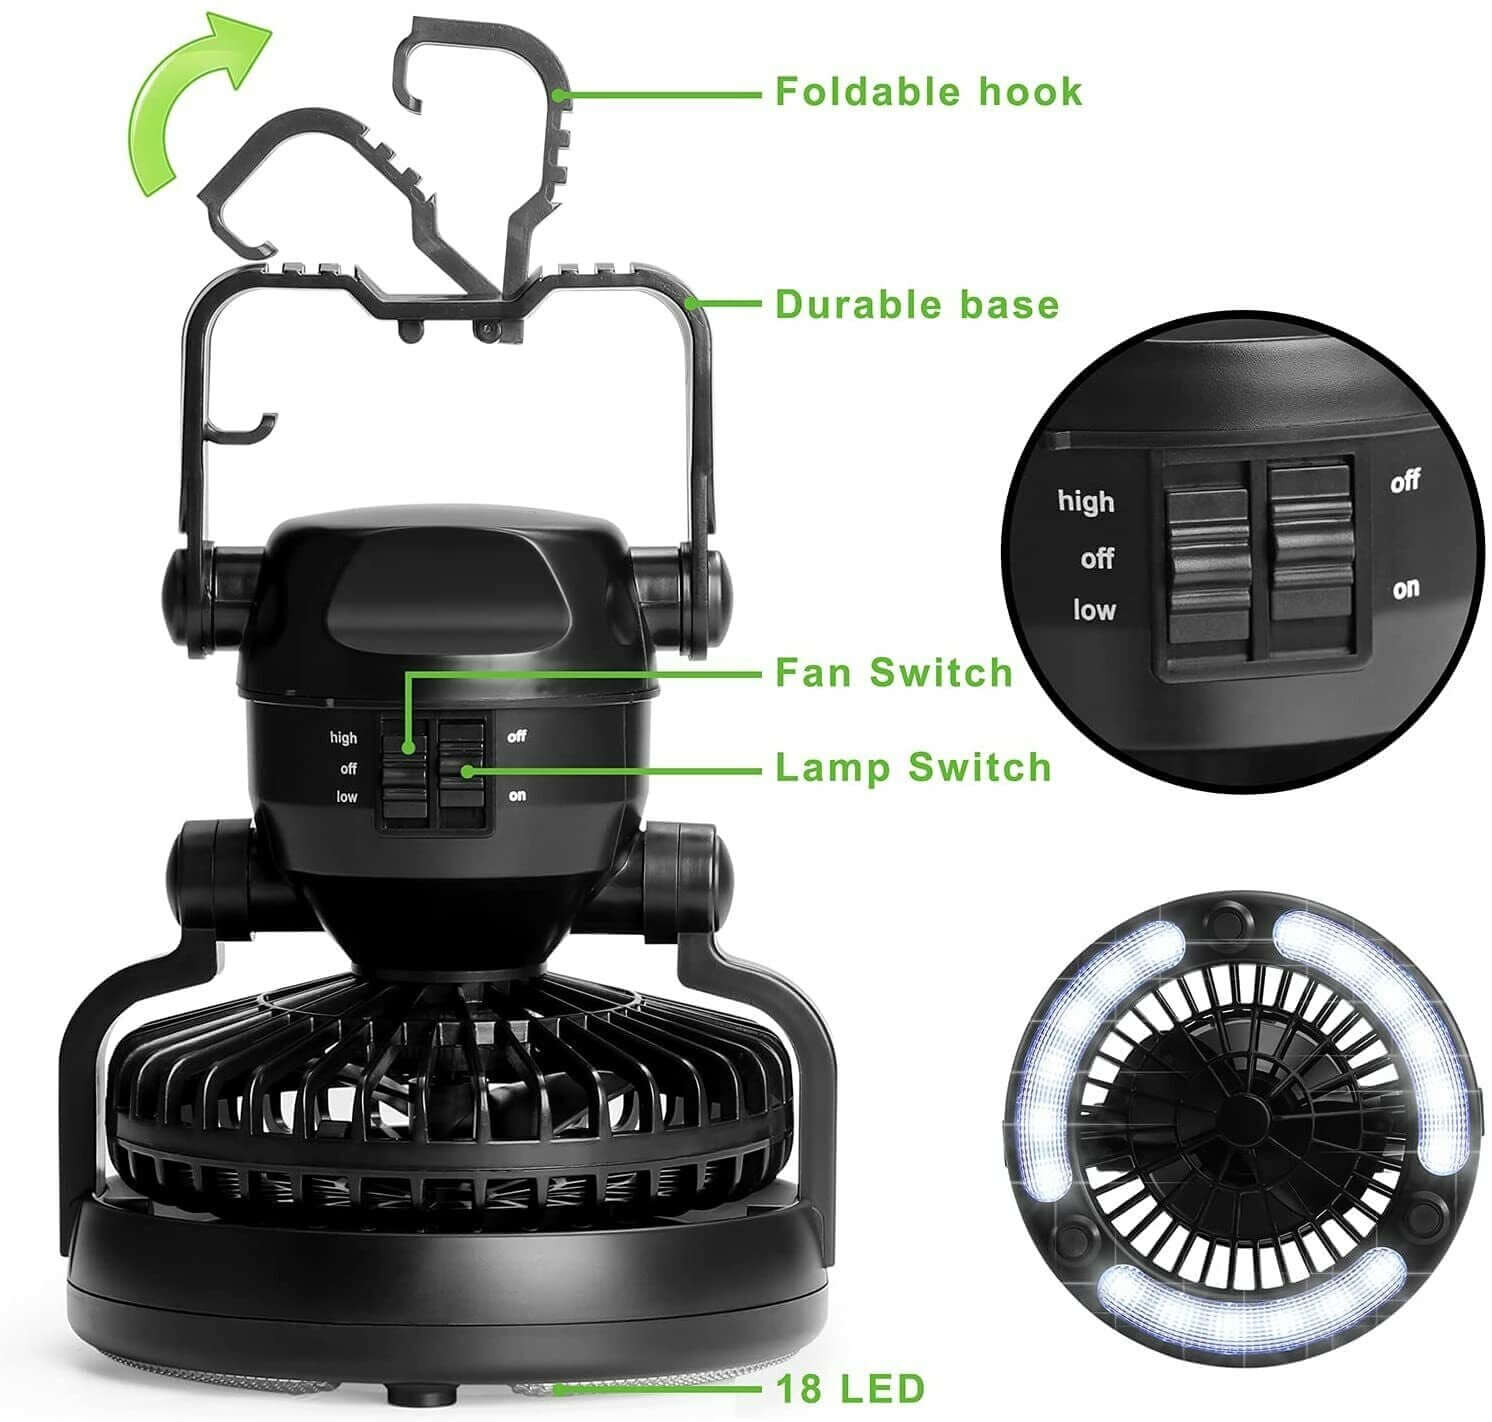 Portable LED Camping Lantern with Fan